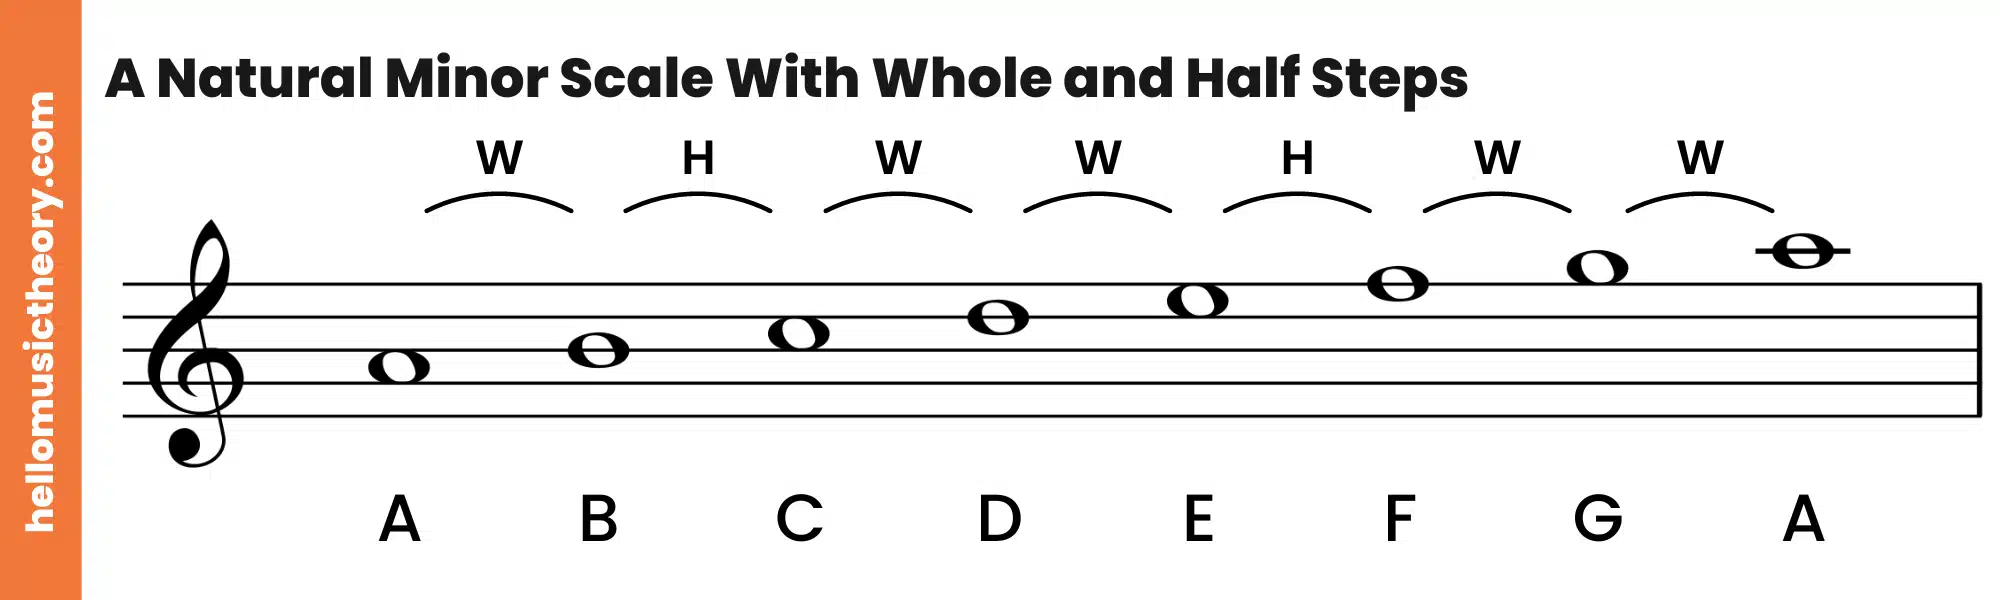 A Natural Minor Scale Treble Clef Ascending With Whole and Half Steps